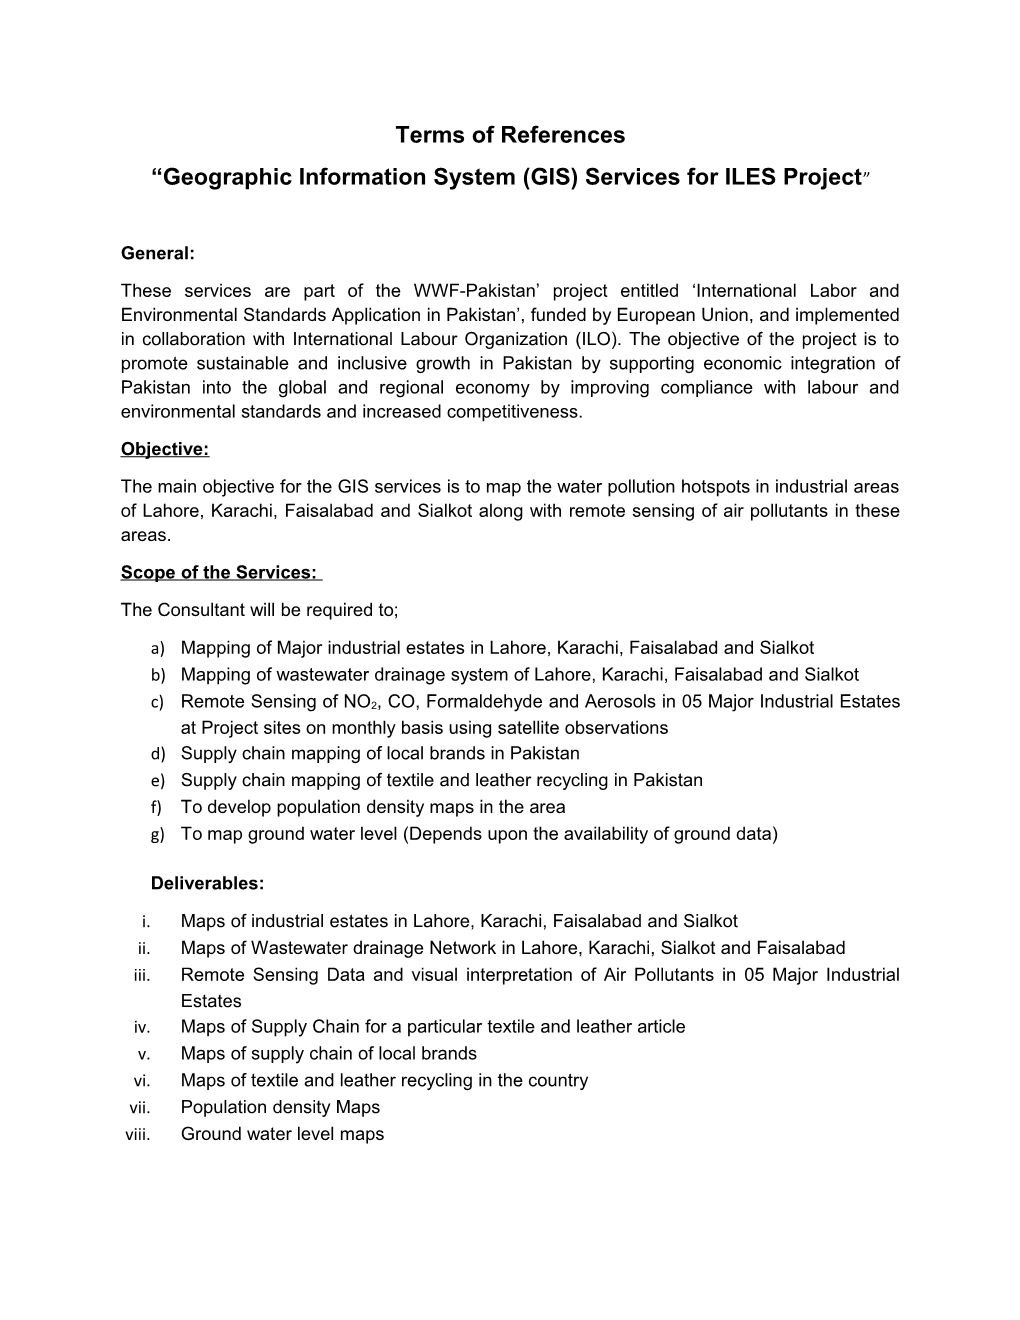 Geographic Information System (GIS)Services for ILES Project